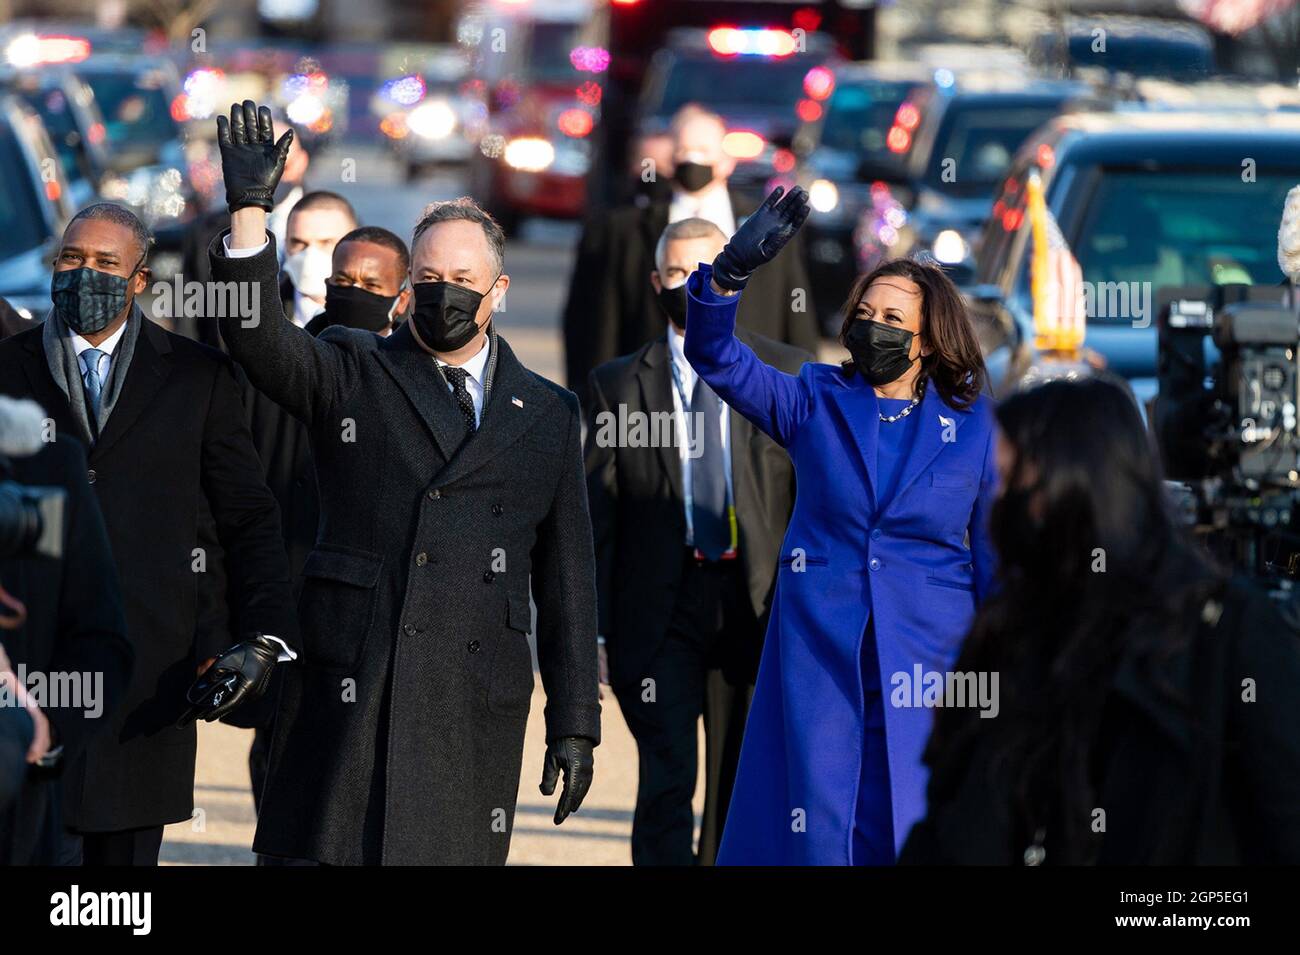 Vice President Kamala Harris and her husband, Mr. Doug Emhoff, wave to bystanders during the inaugural parade, Jan. 20, 2021  (BSLOC 2021 4 9) Stock Photo